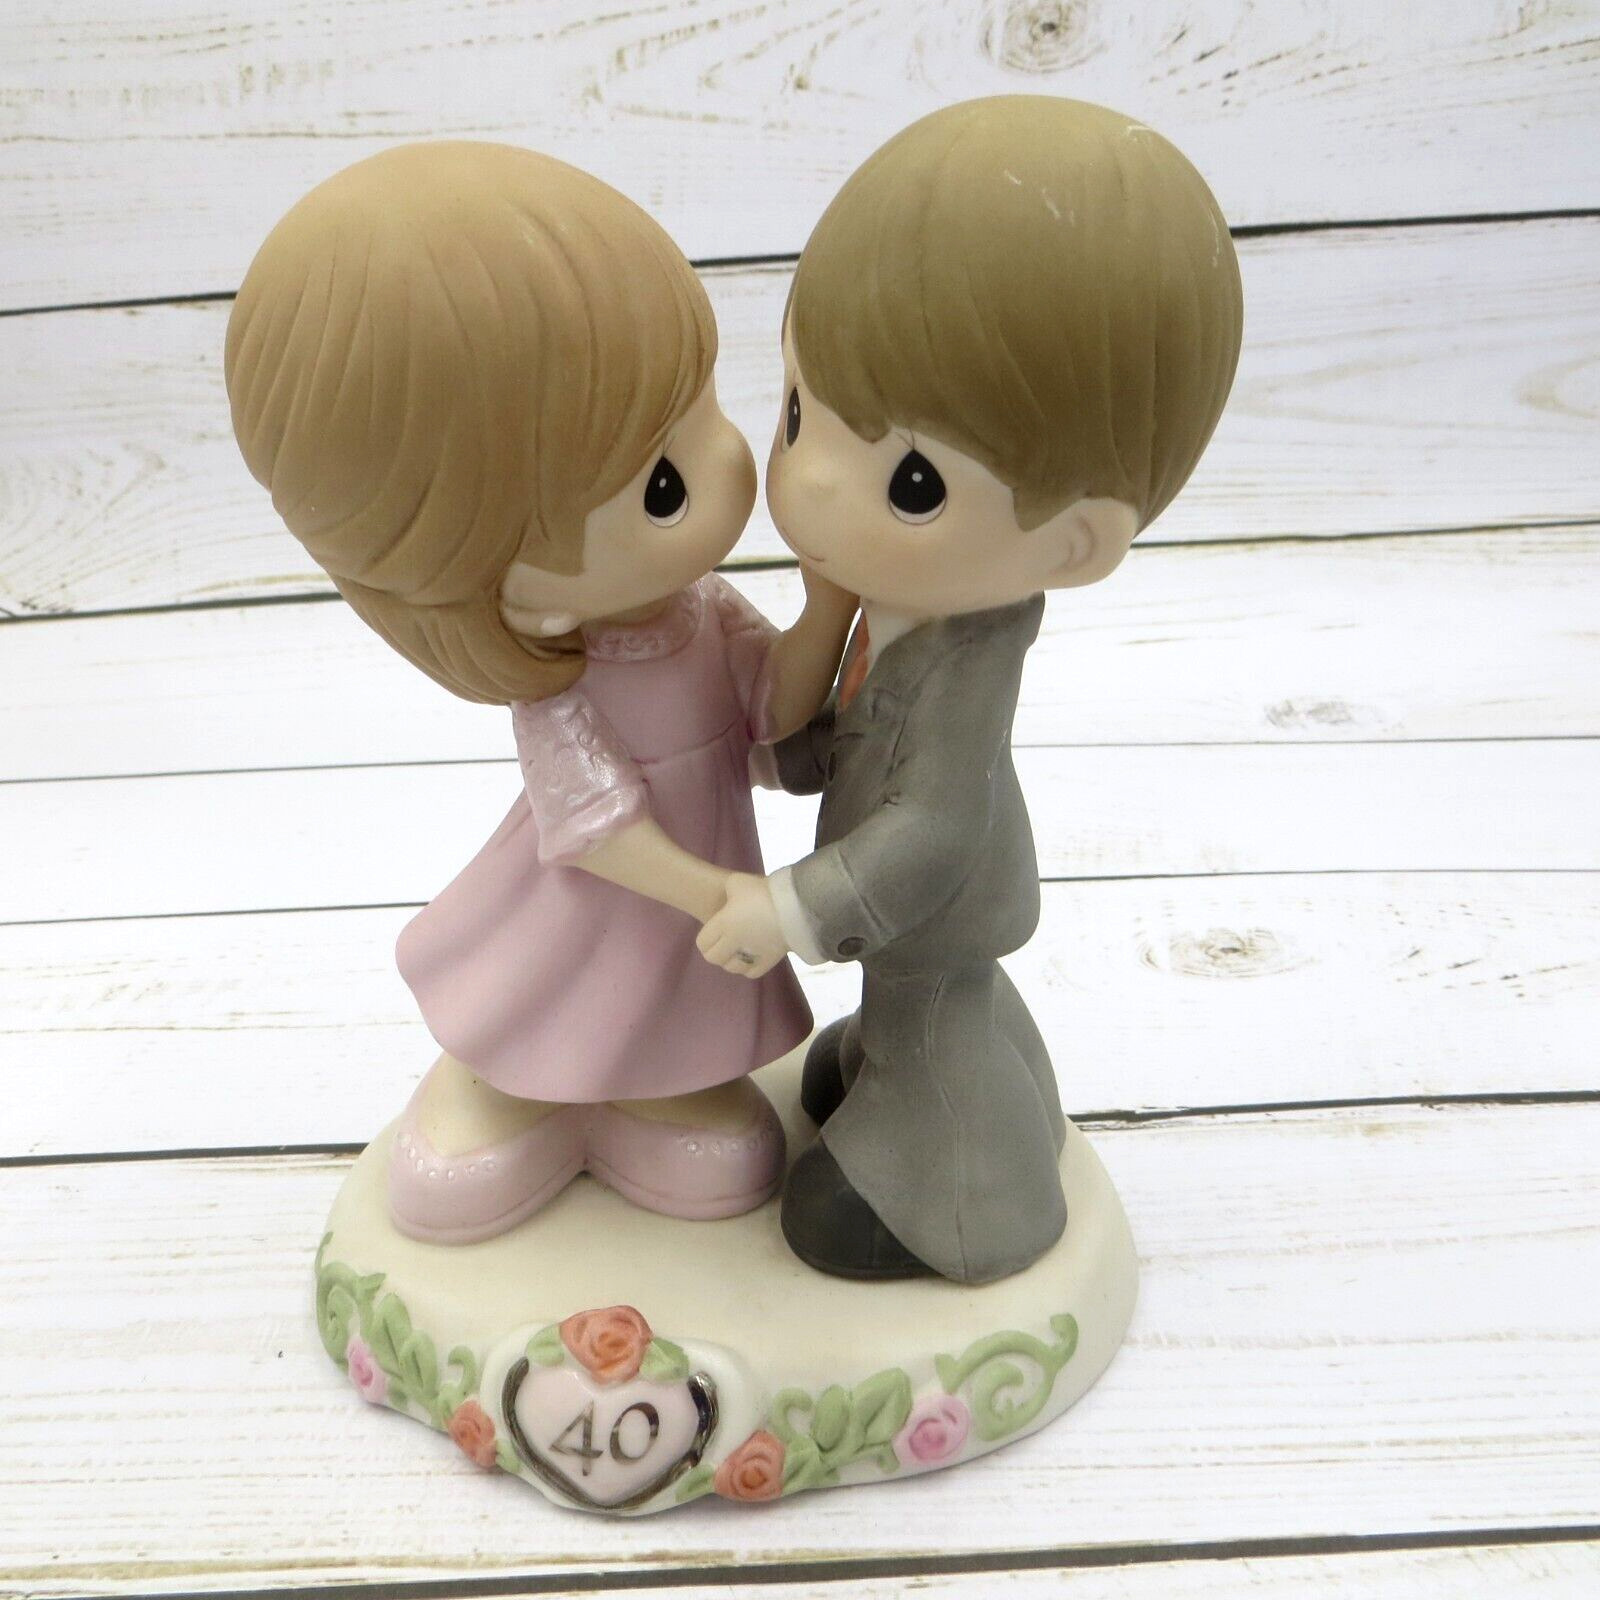 Precious Moments 40th Anniversary Figurine Sweeter As The Years Go By 113008